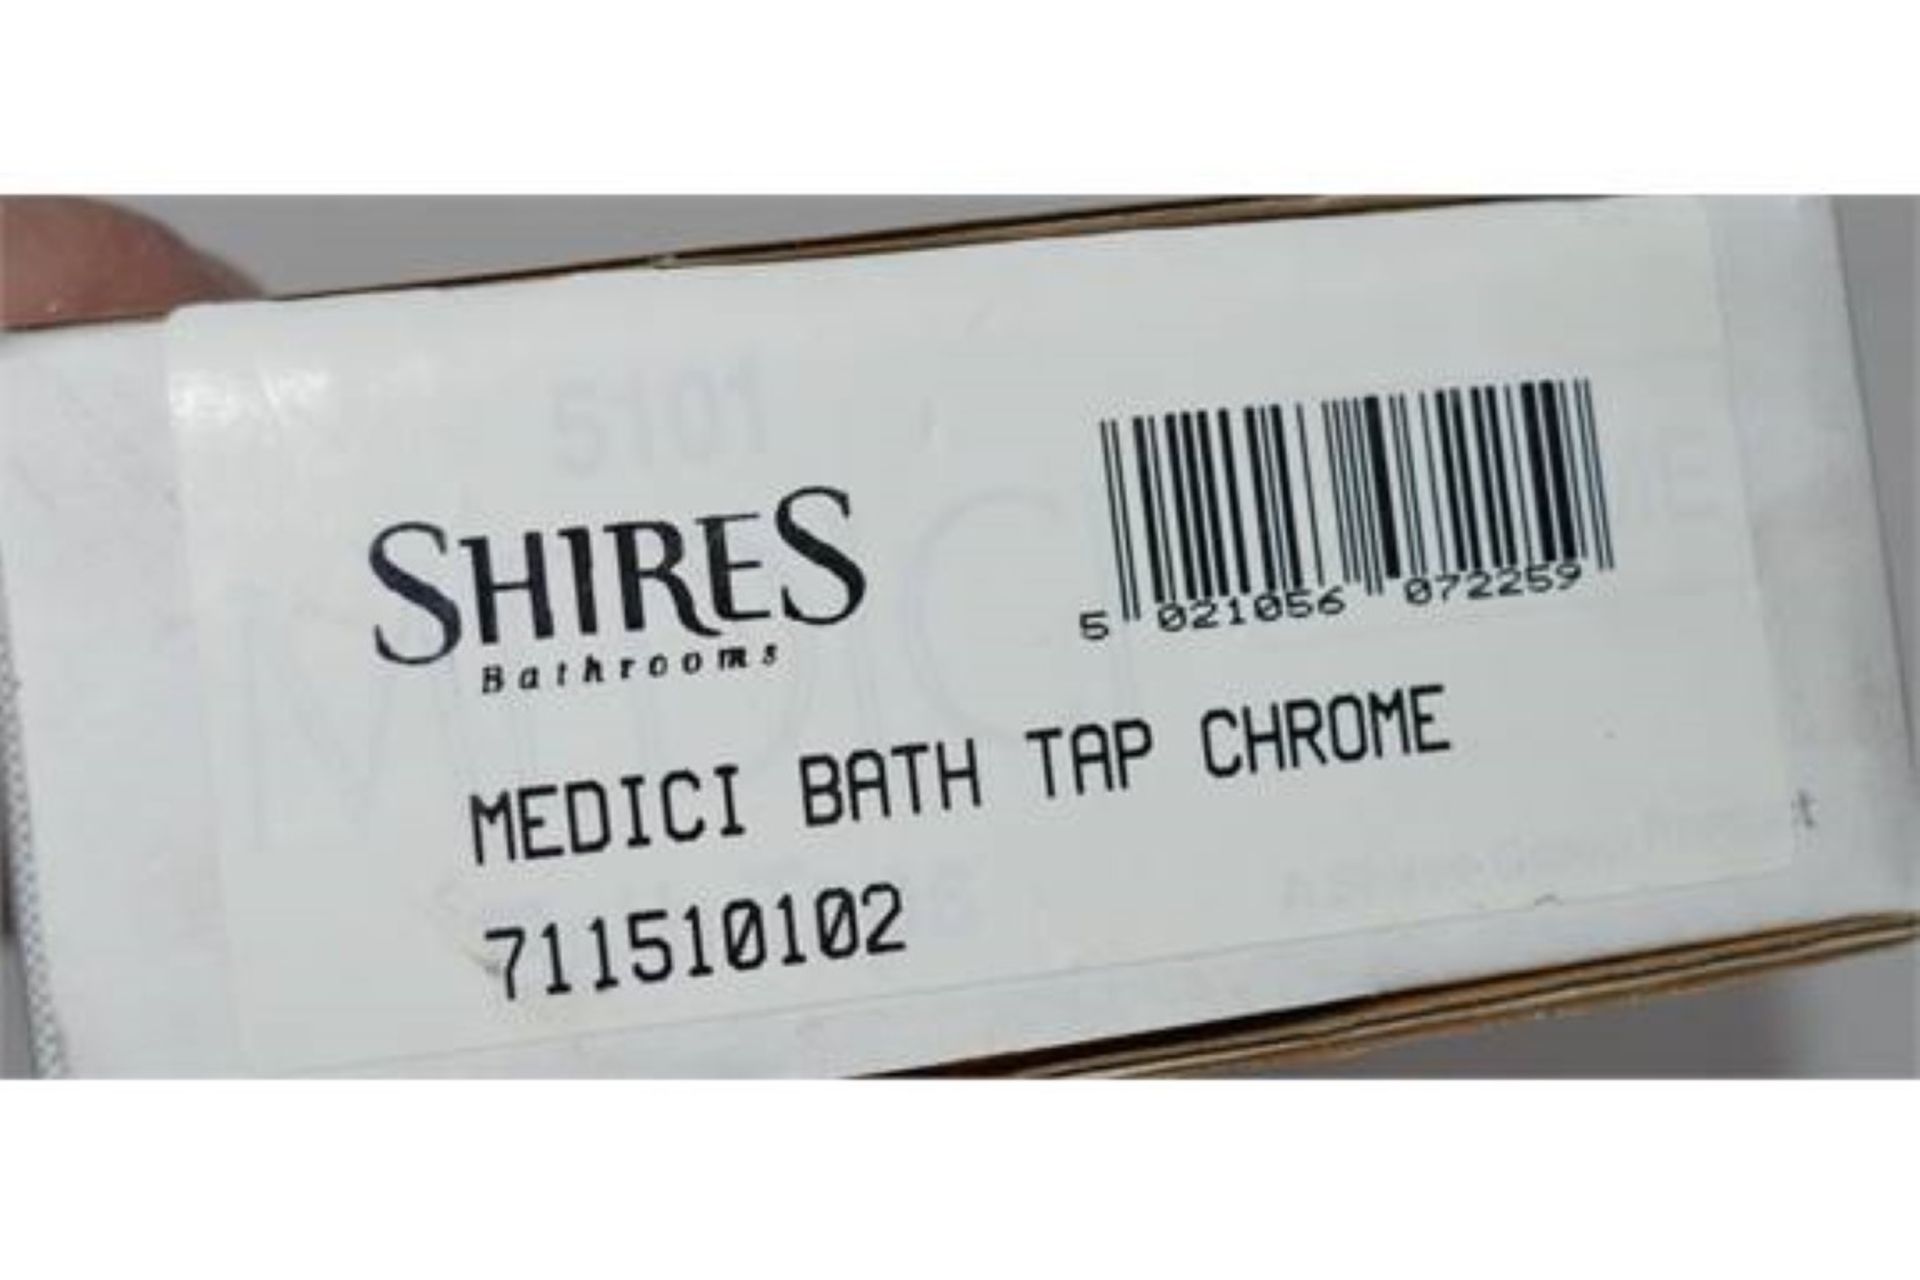 12 x Sets of Medici Bath Taps in Chrome - Shire Bathrooms - Without Tap Heads - New Boxed Stock - - Image 2 of 4